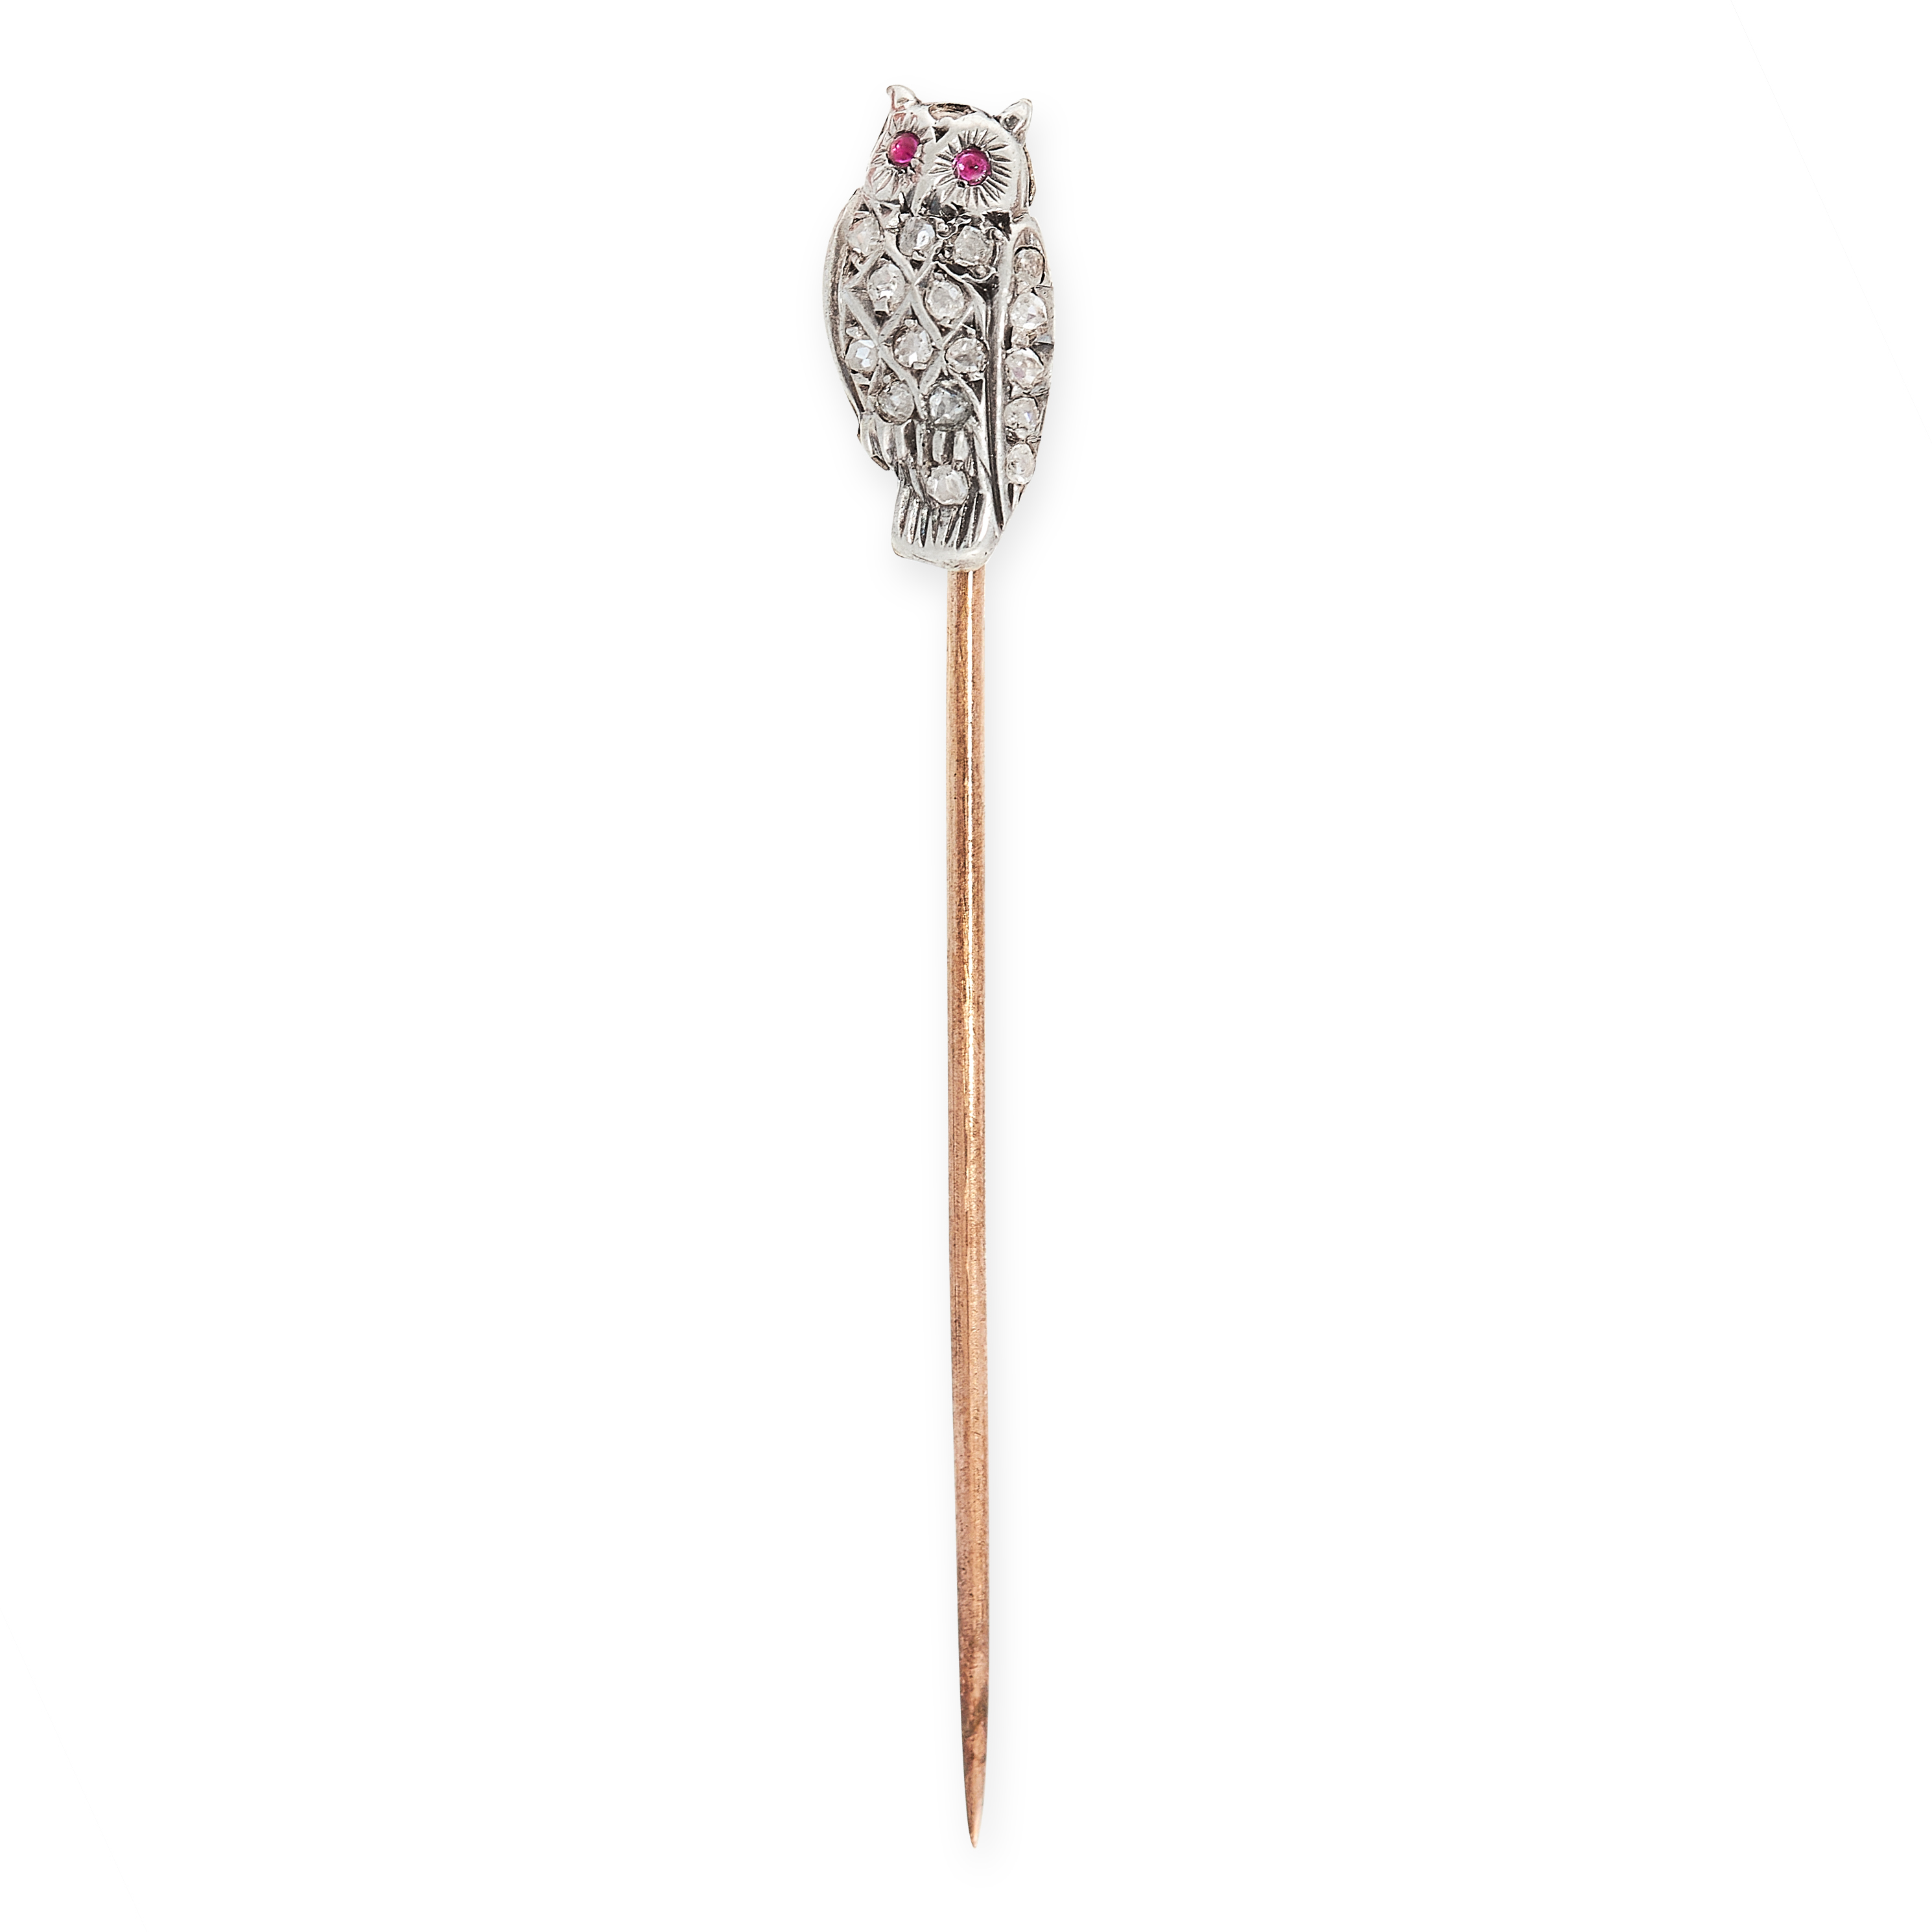 ANTIQUE RUBY AND DIAMOND OWL TIE / STICK PIN mounted in yellow gold and silver, the pin surmounted